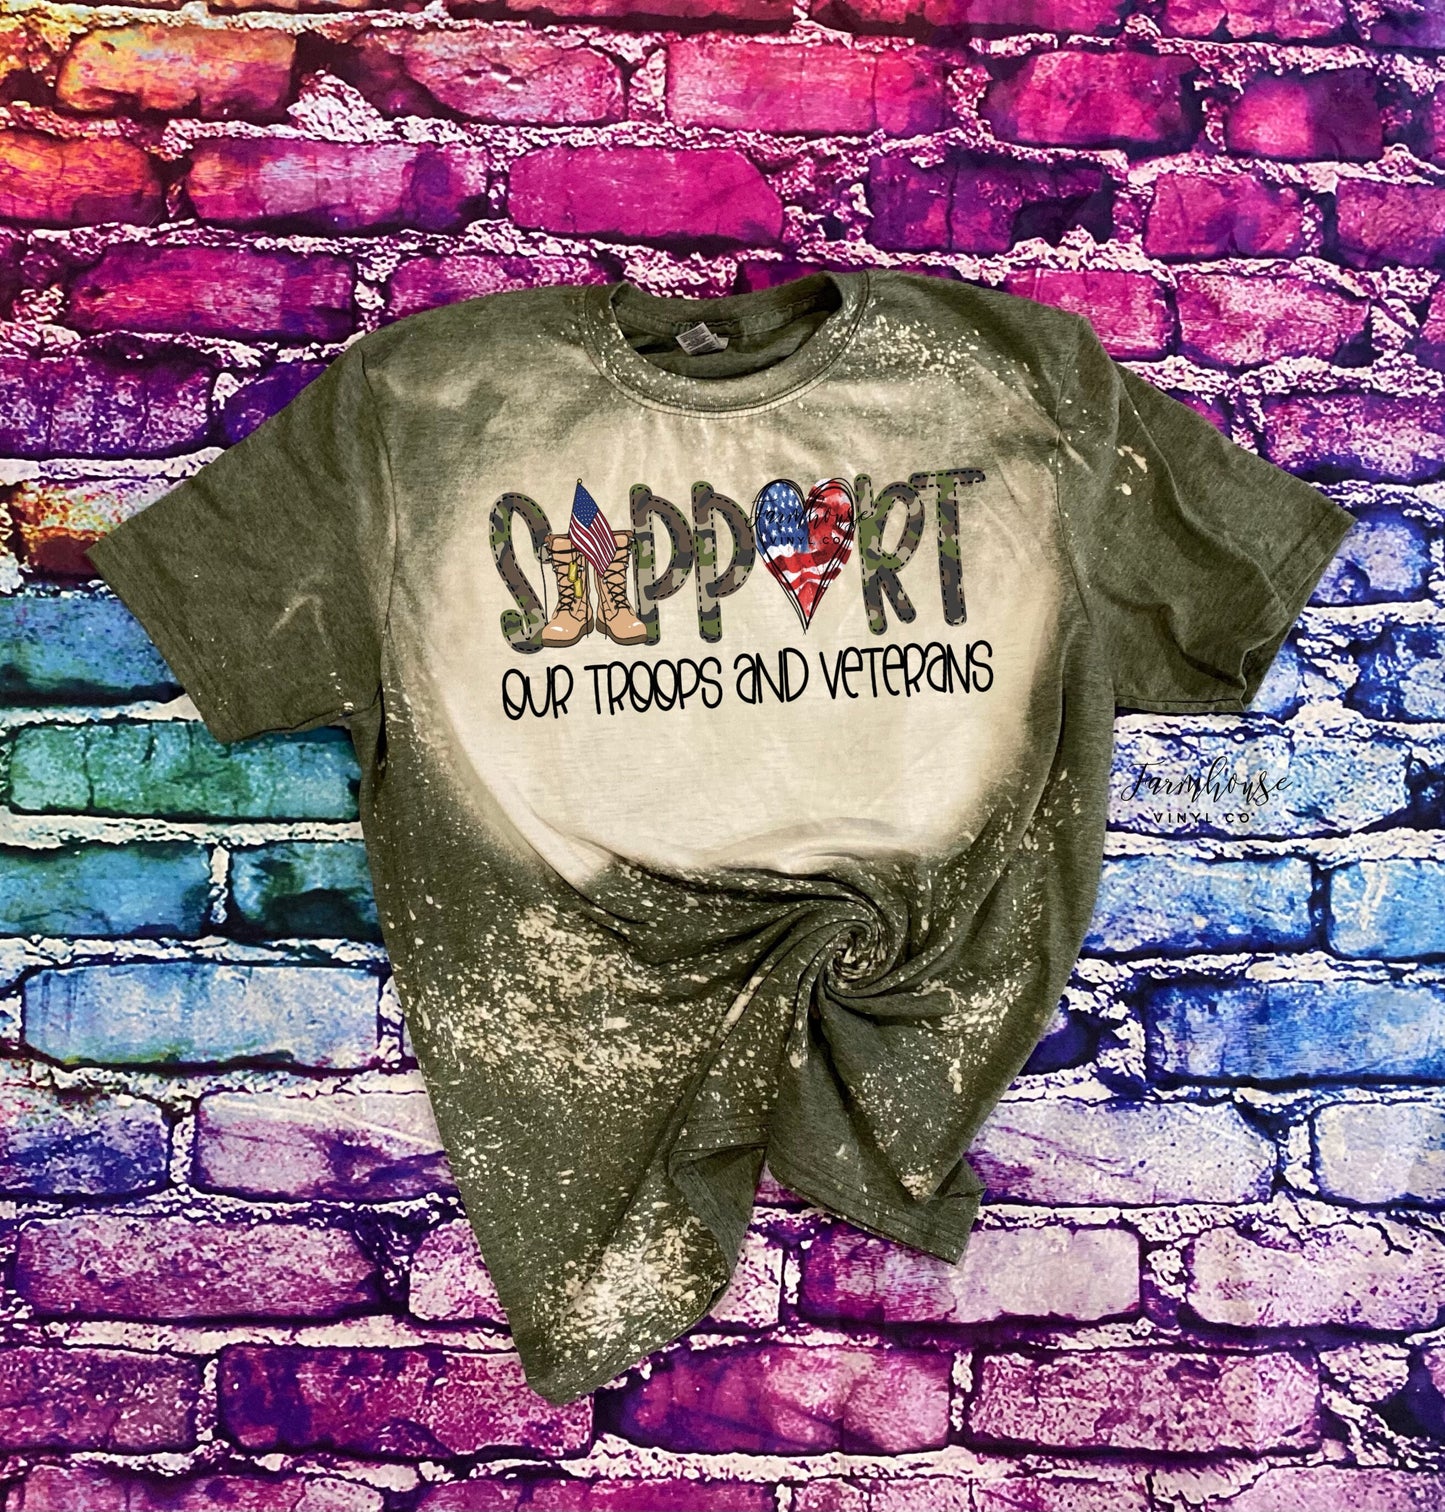 Support Our Troops Military Shirt / American Flag Shirt / Support Our Troops & Veterans / Freedom Shirt / Military Spouse Shirt / American - Farmhouse Vinyl Co